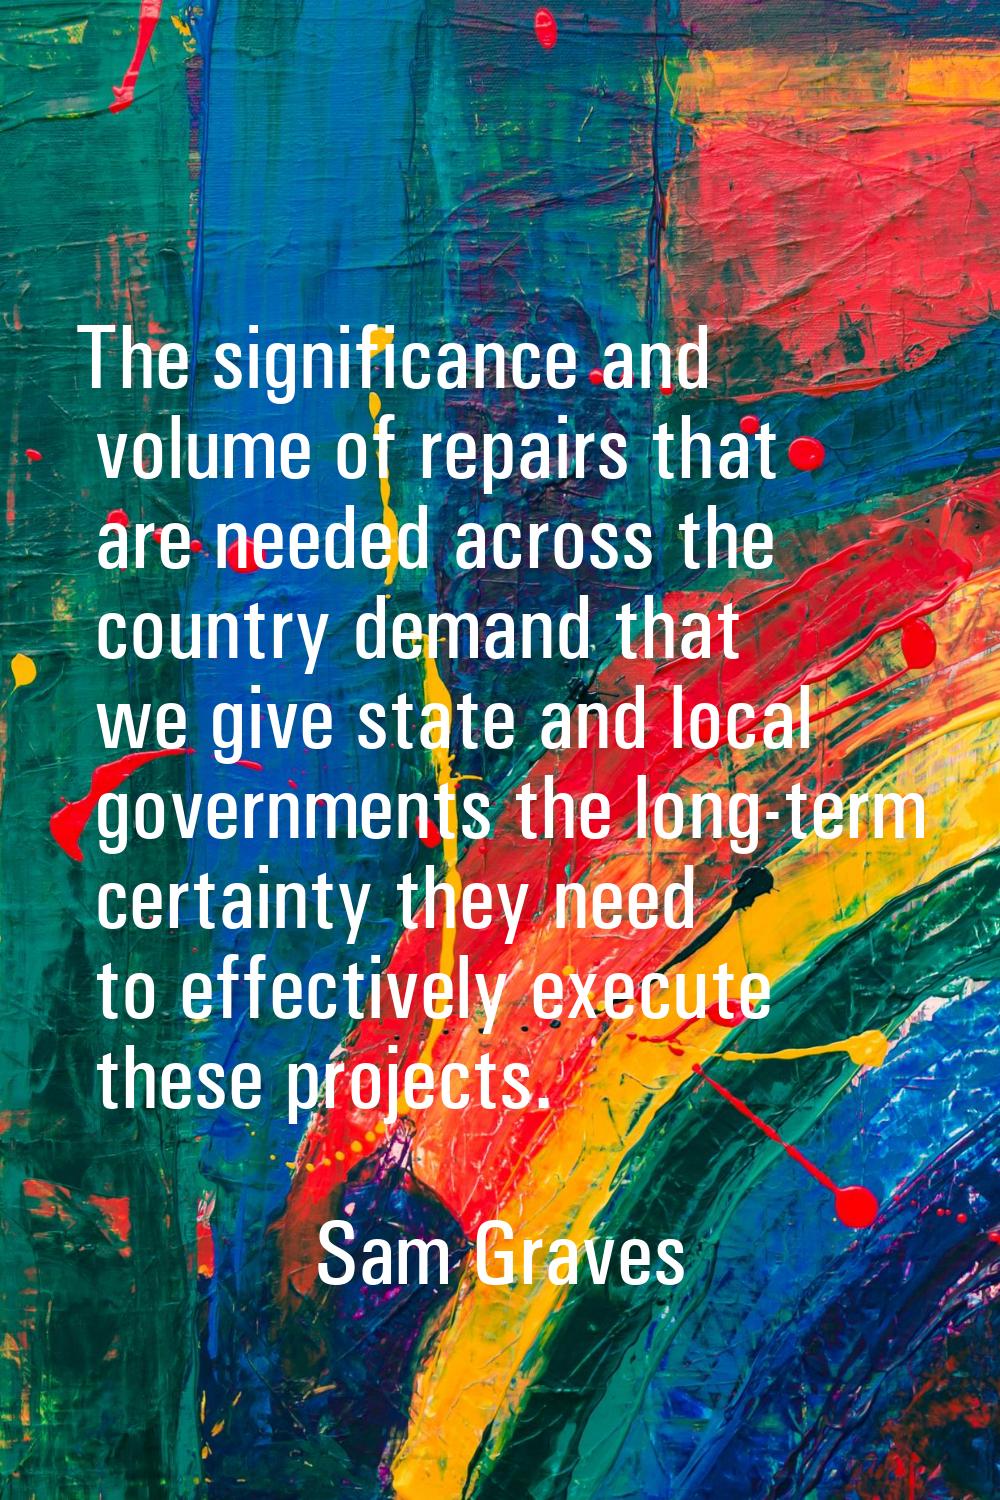 The significance and volume of repairs that are needed across the country demand that we give state